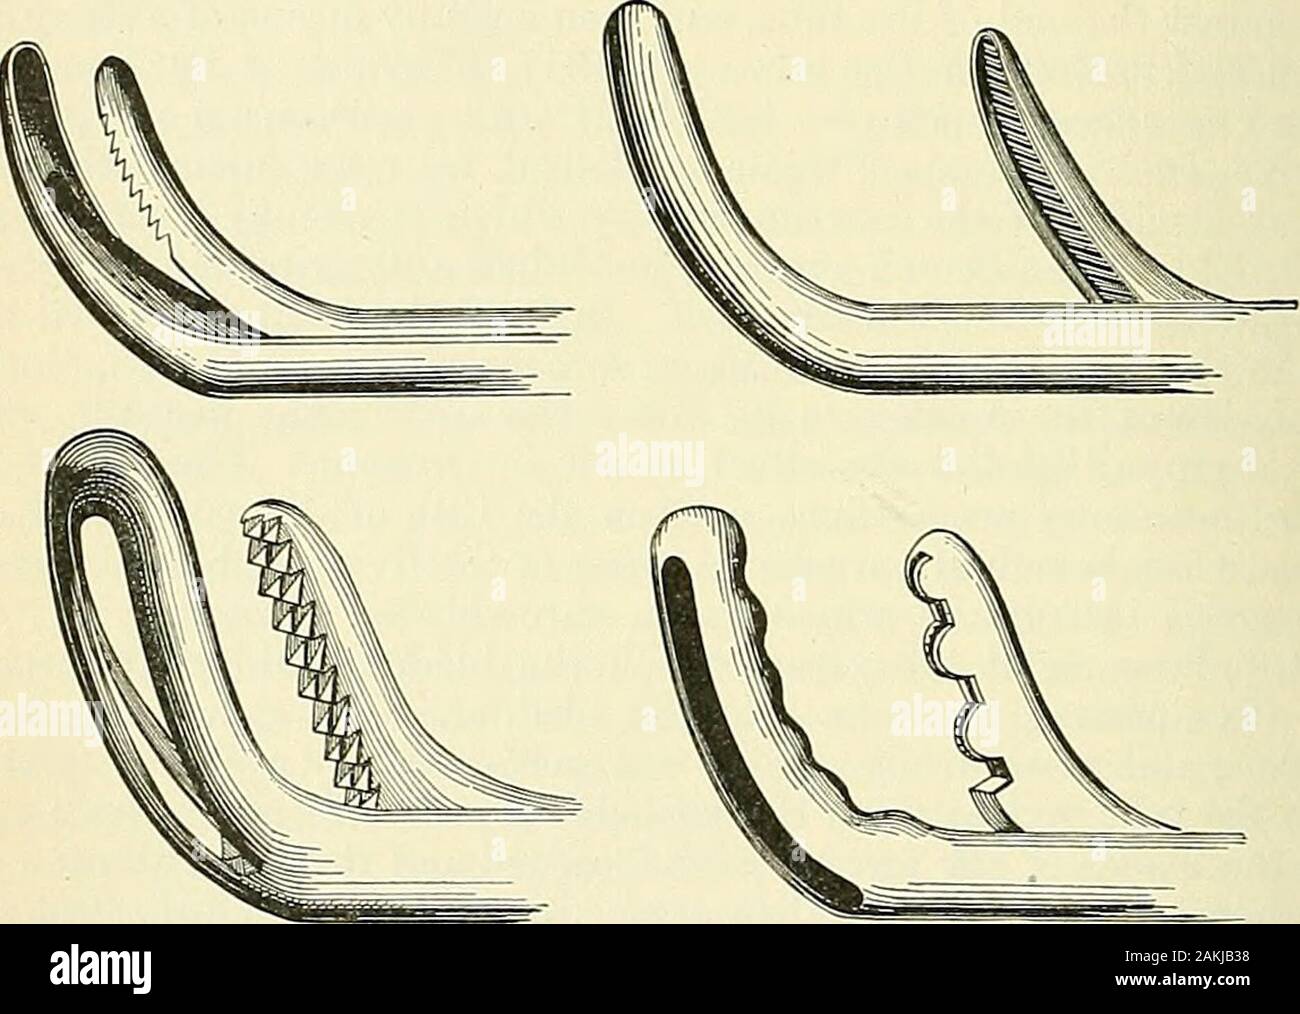 An American text-book of genito-urinary diseases, syphilis and diseases of the skin . Fig. 141.—Thompsons lithotrite. motion of the blades, and also employed a fenestrated blade to clear the jawsof the debris, so that the withdrawal of the instrument was obviated (Fig.141). The jaw of the male blade was variously modified by roughening it,. Fig. 142.—Some modifications of the lithotrite blades. furnishing it with teeth, projections, etc., all designed to improve the grasp-ing power on the stone. In 1878 there came another important change in the lithotrite, by which Stock Photo